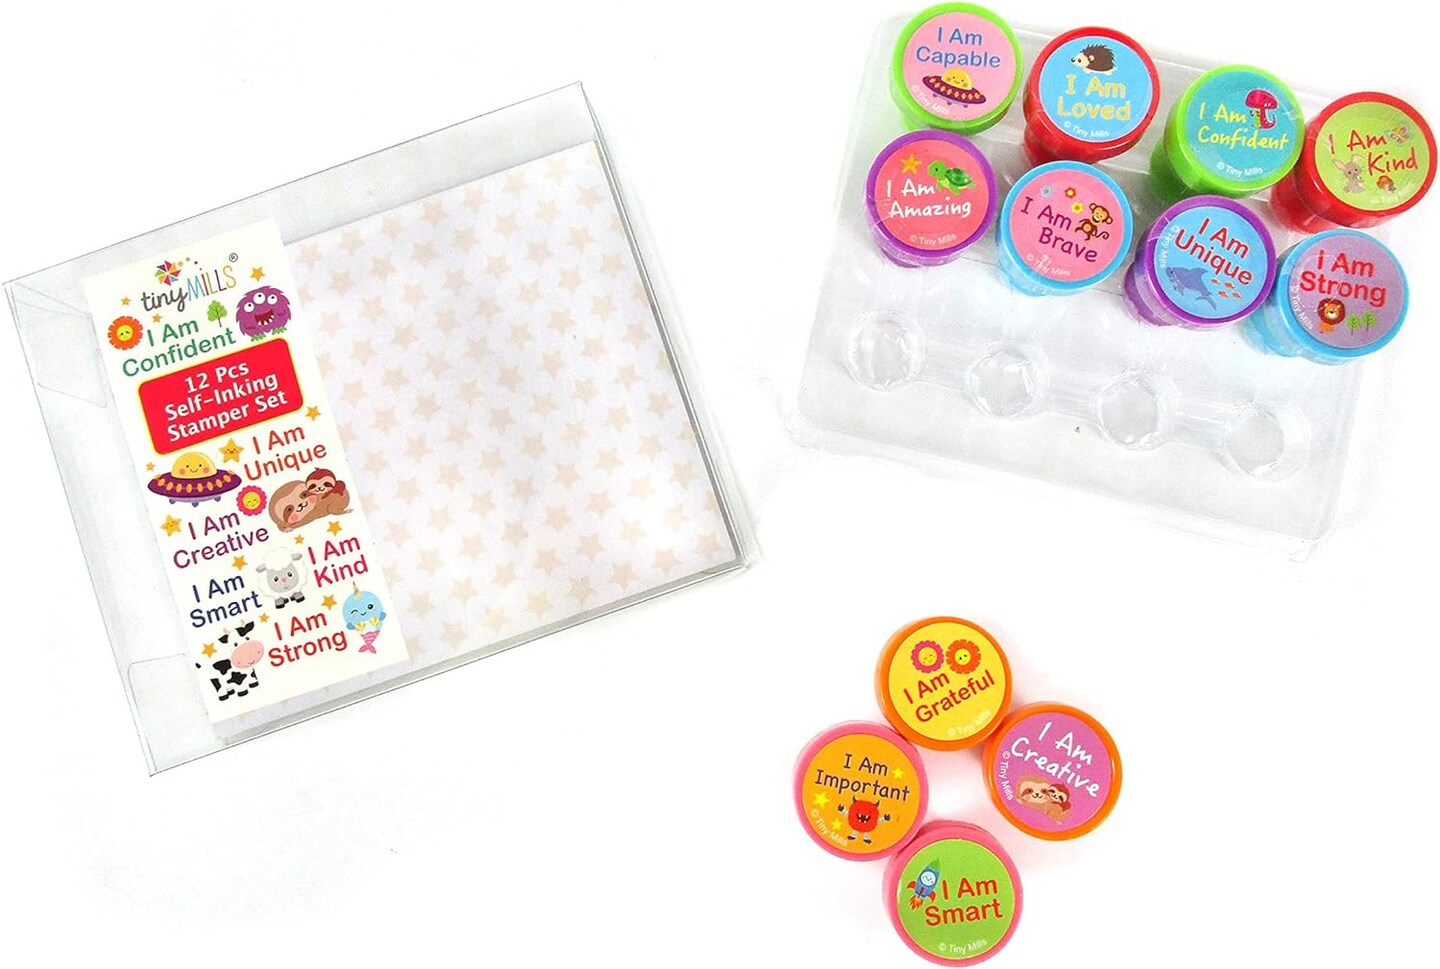 TINYMILLS 12 Pcs Positive Affirmation Stamp Kit for Kids - Positive Mindfulness Self Inking Stamps